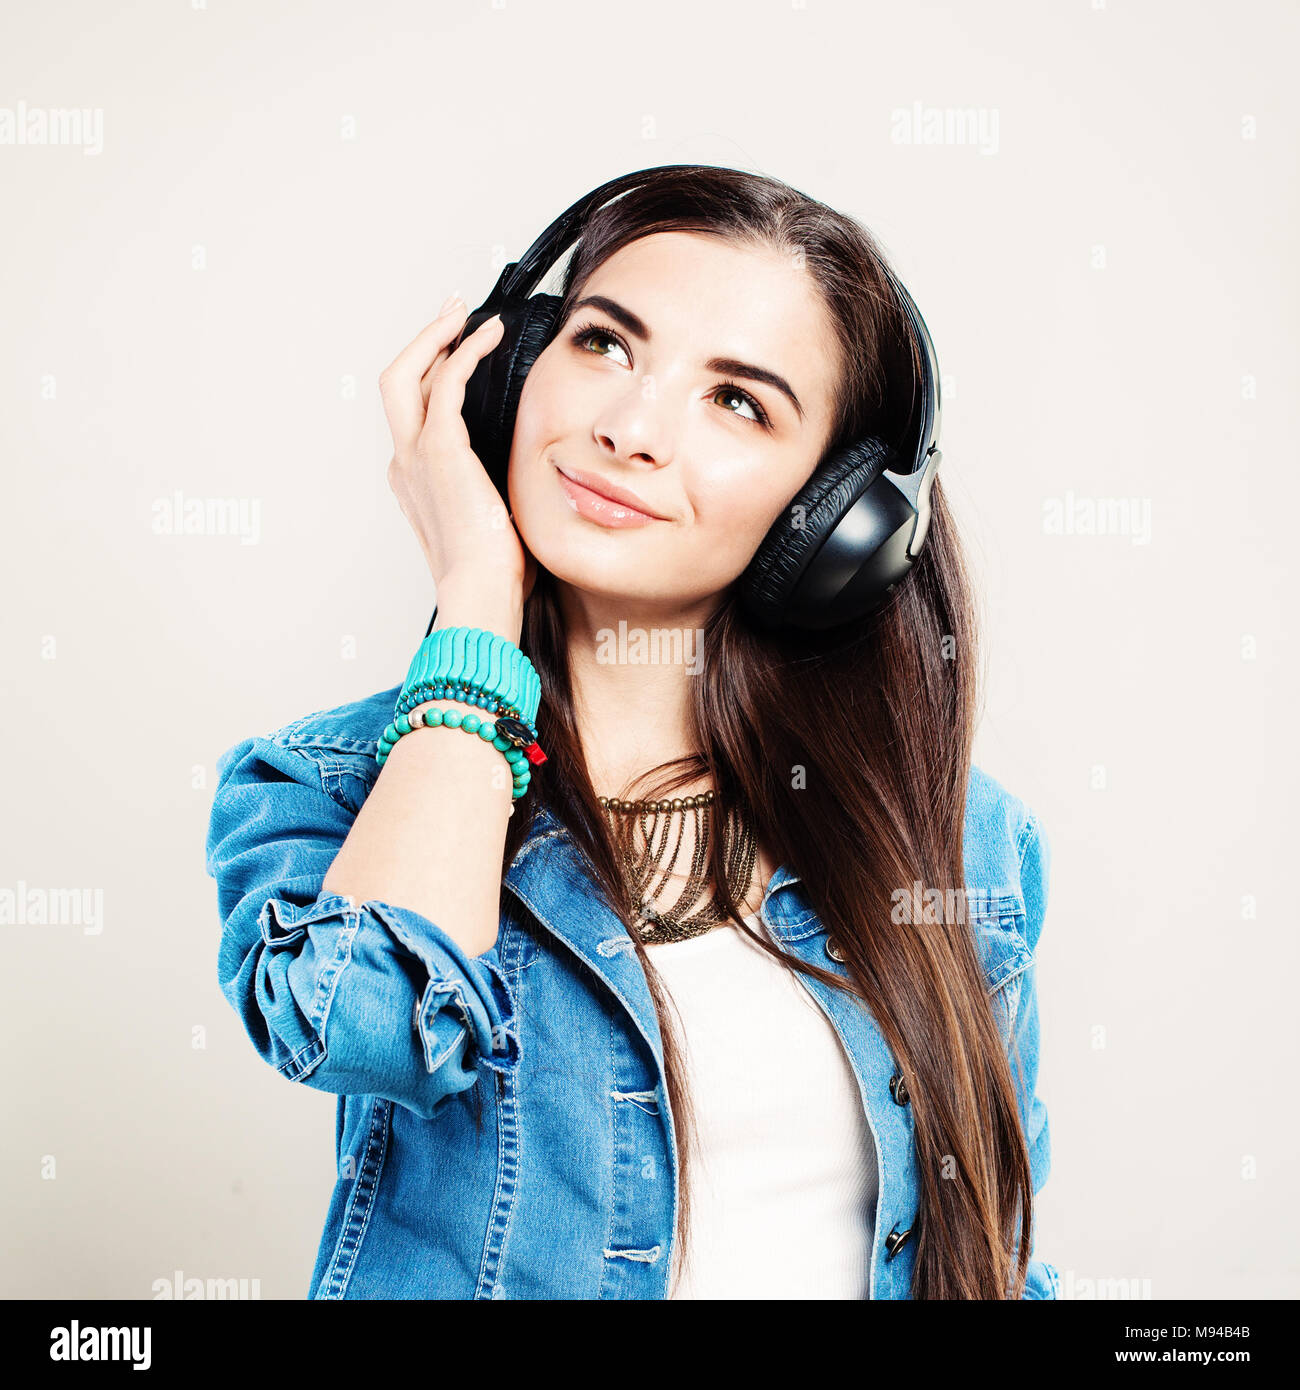 Happy Girl Enjoying the Music and Looking Up. Young Beautiful Woman with Earphones Stock Photo